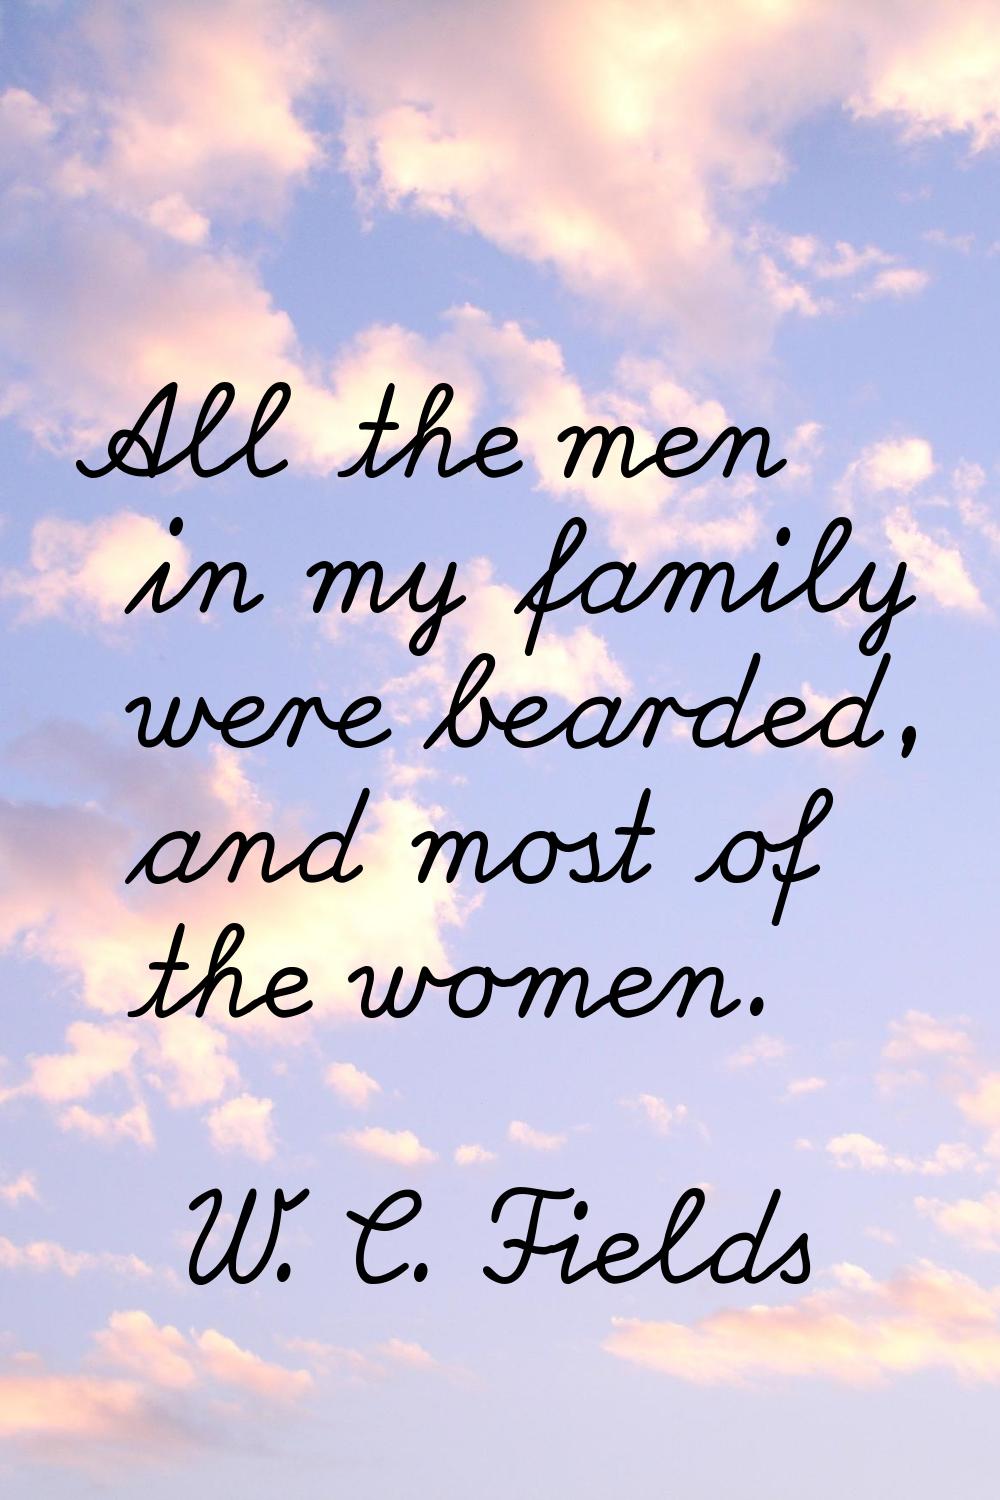 All the men in my family were bearded, and most of the women.